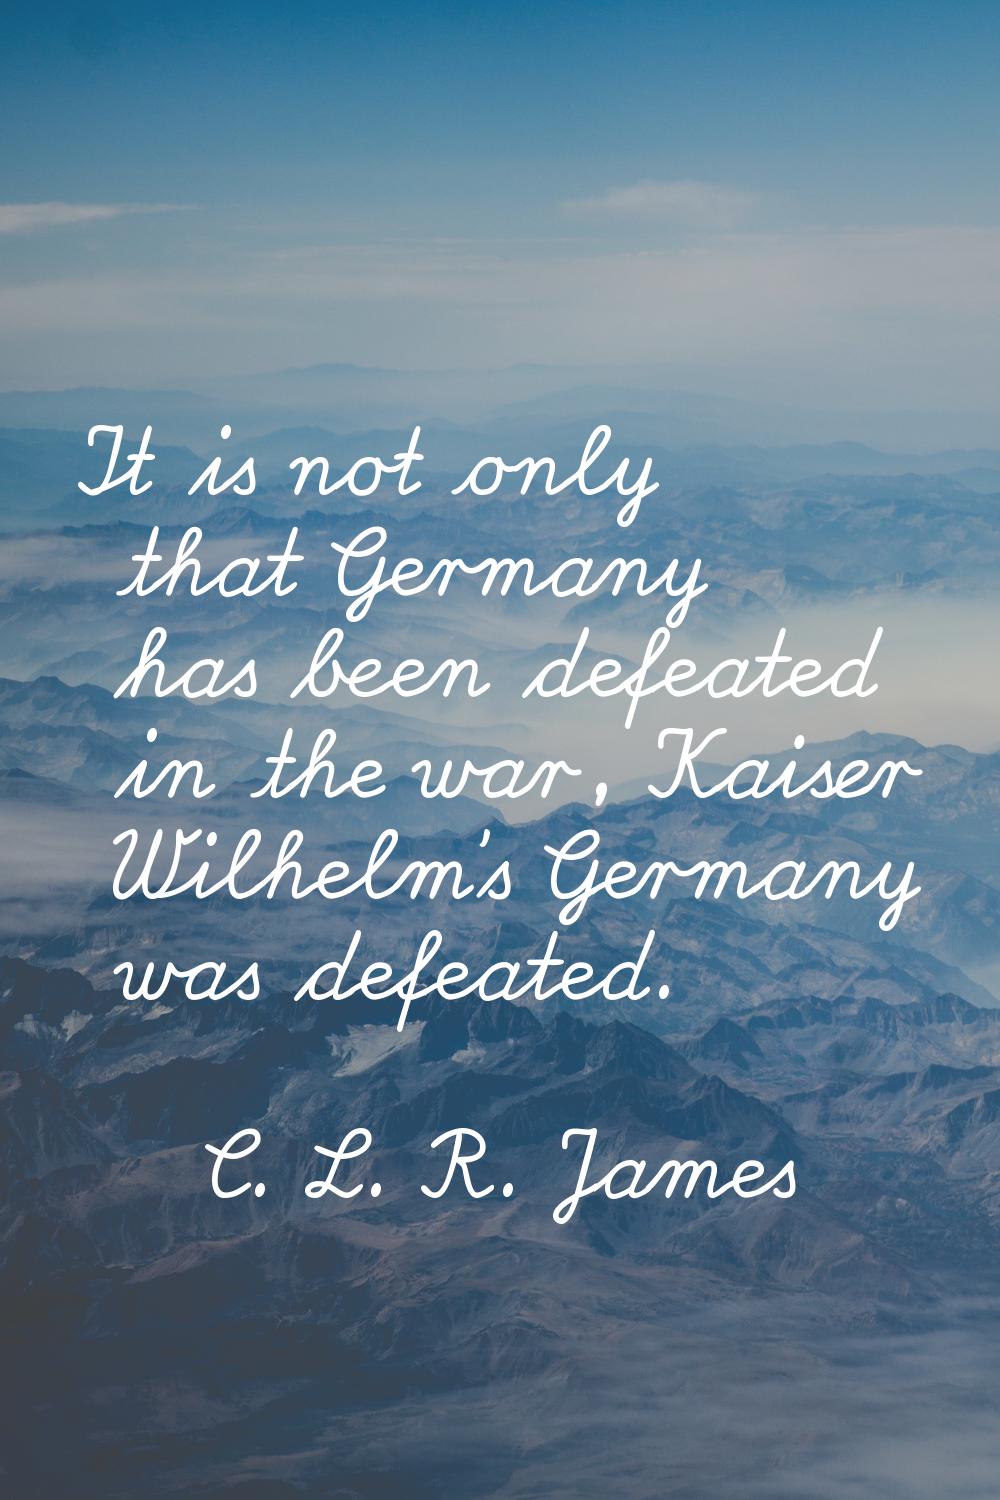 It is not only that Germany has been defeated in the war, Kaiser Wilhelm's Germany was defeated.